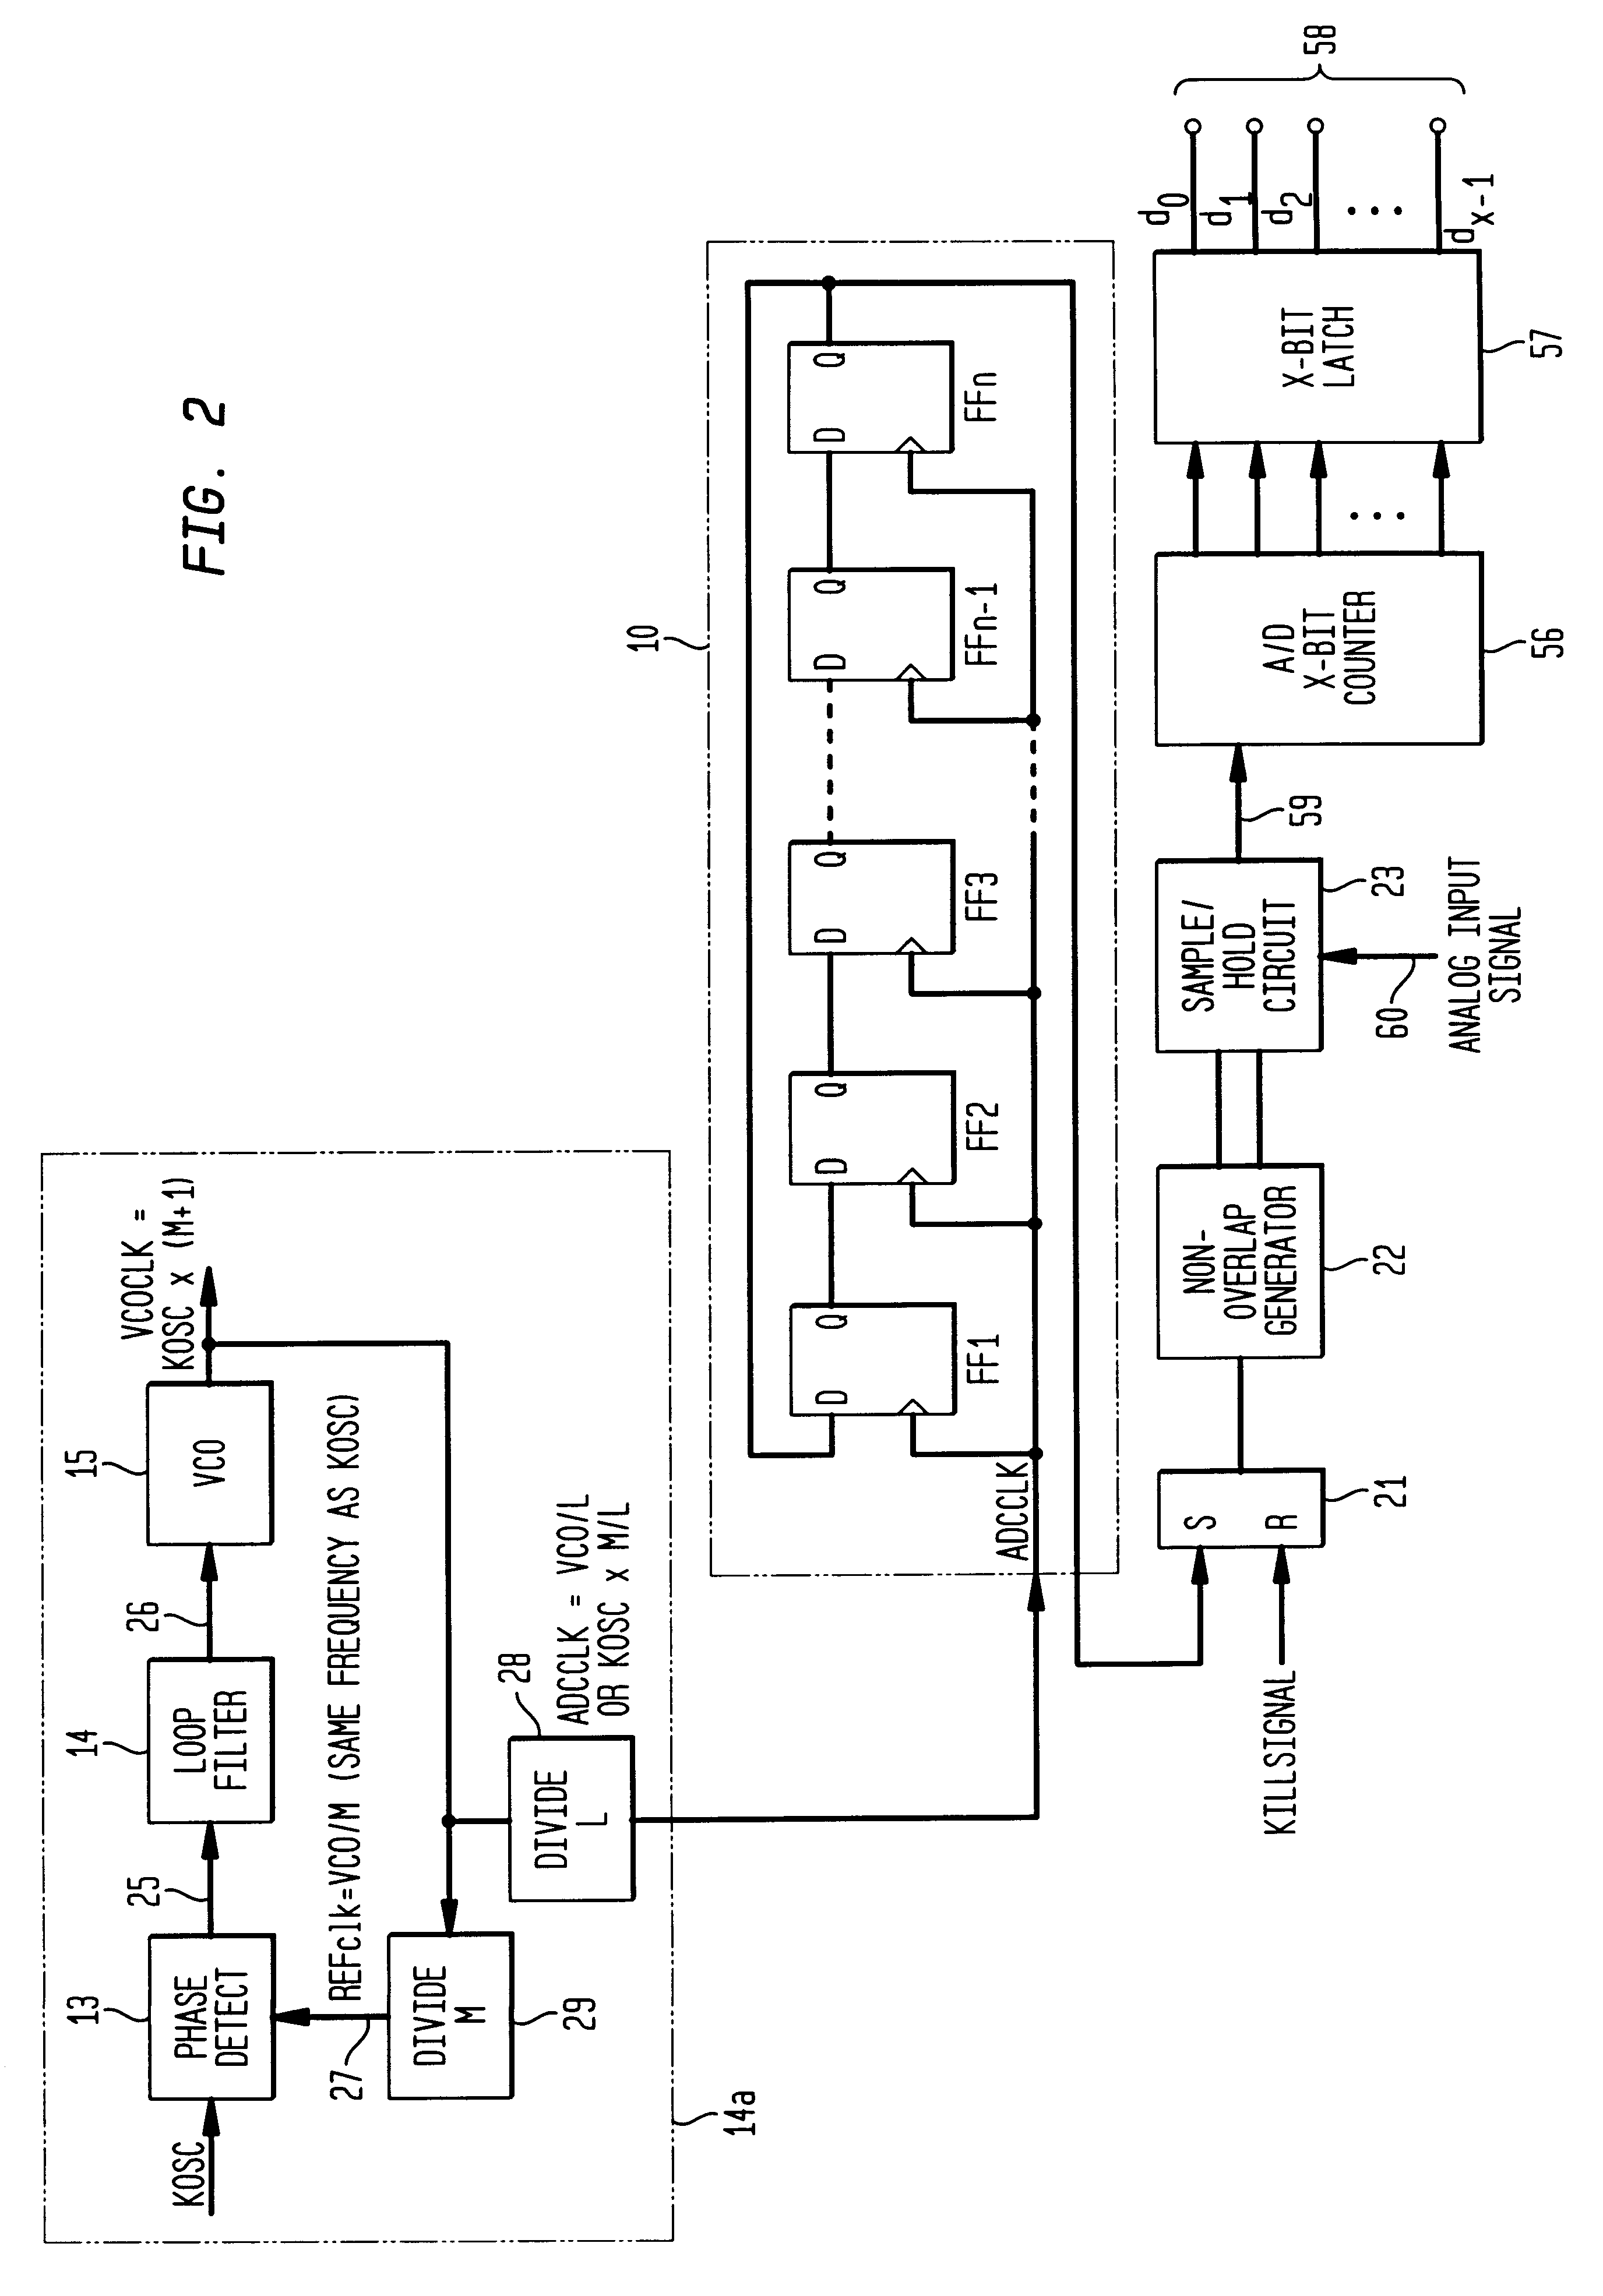 Clocking technique for reducing sampling noise in an analog-to-digital converter